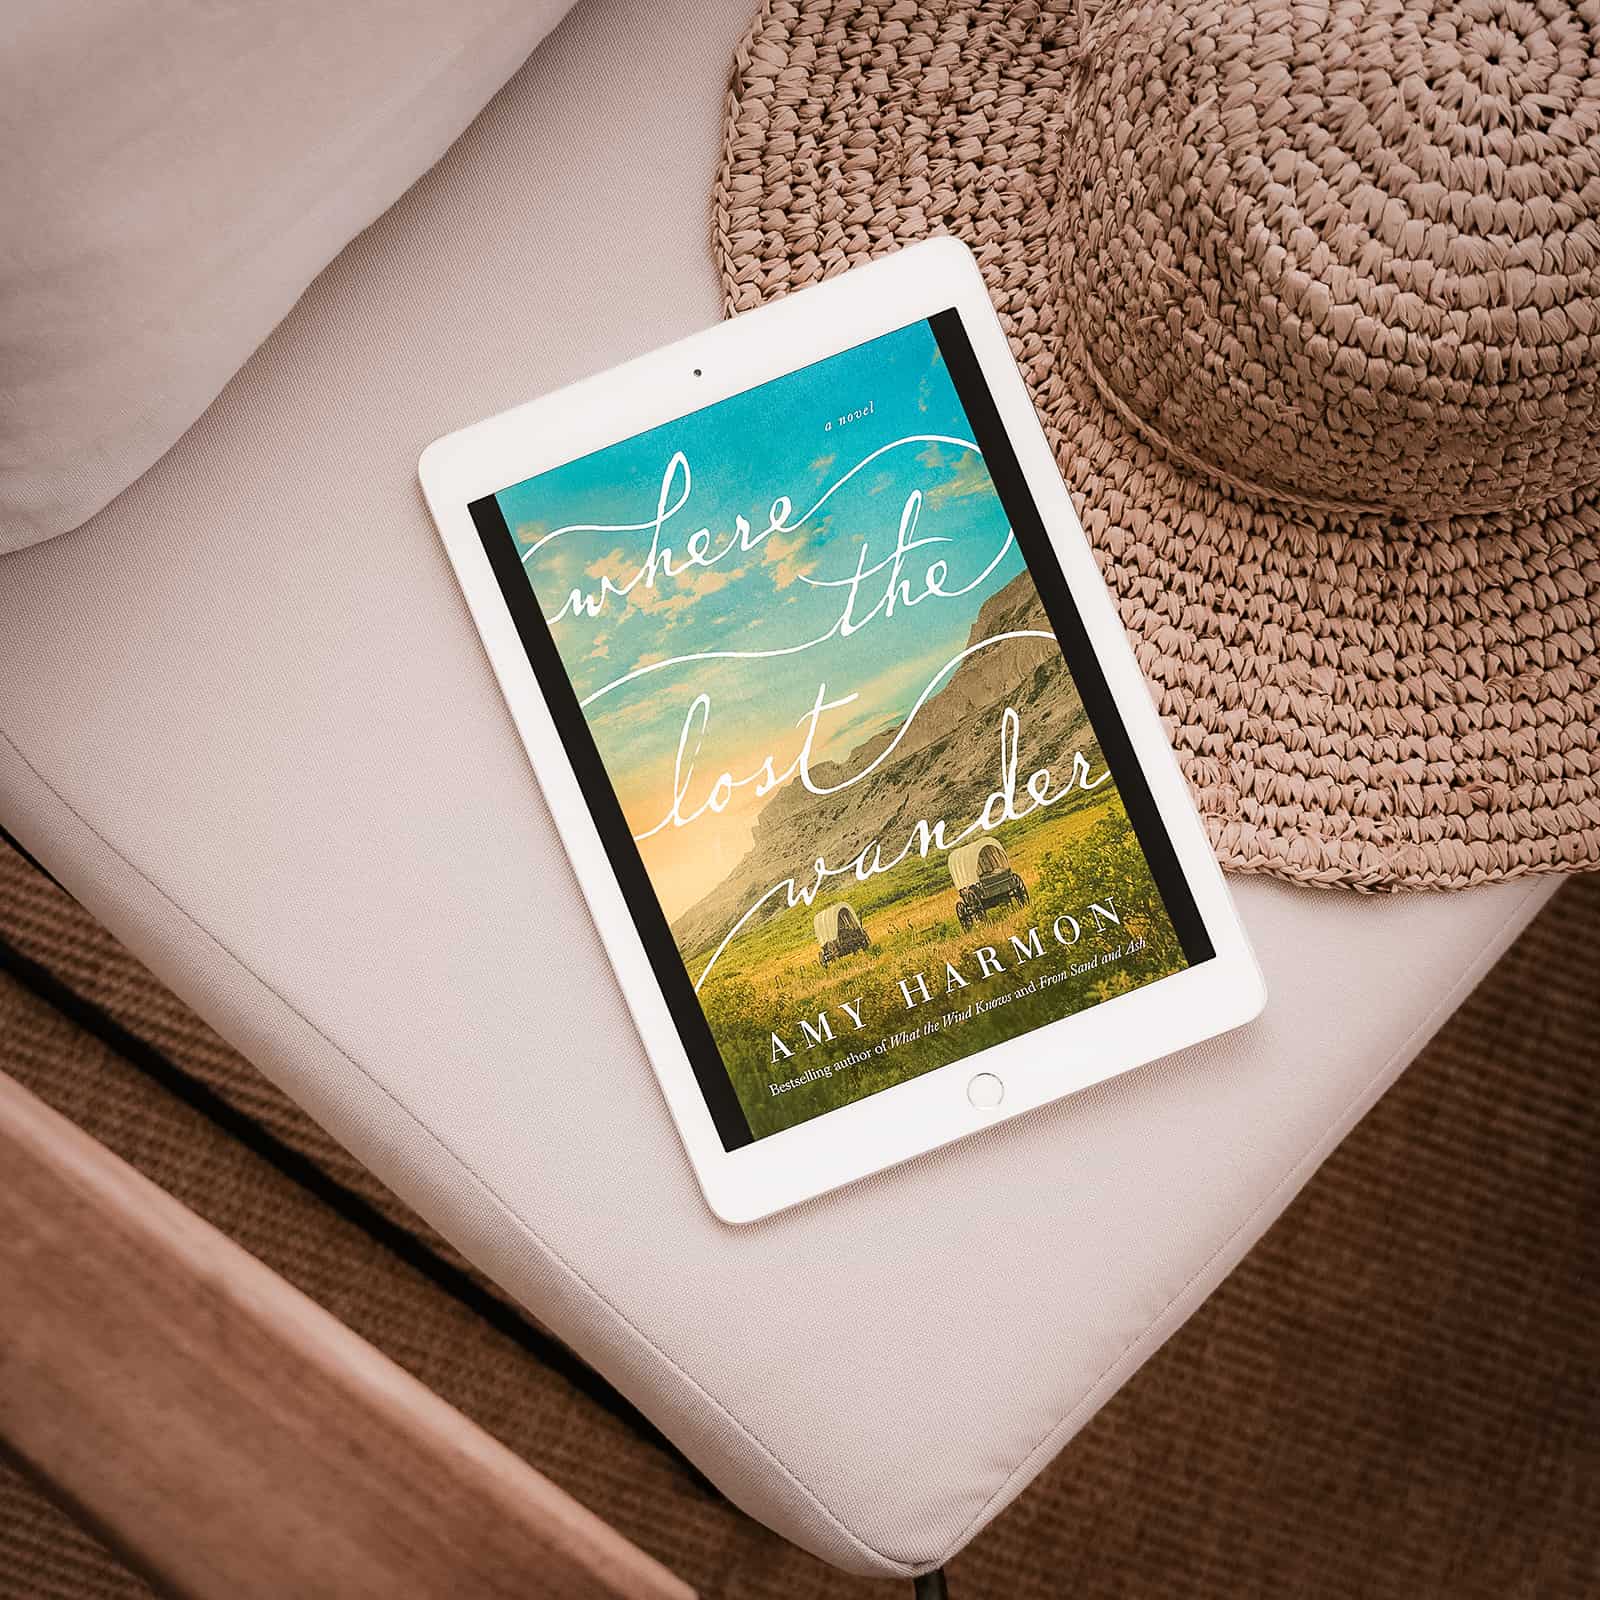 Where the Lost Wander by Amy Harmon – Review